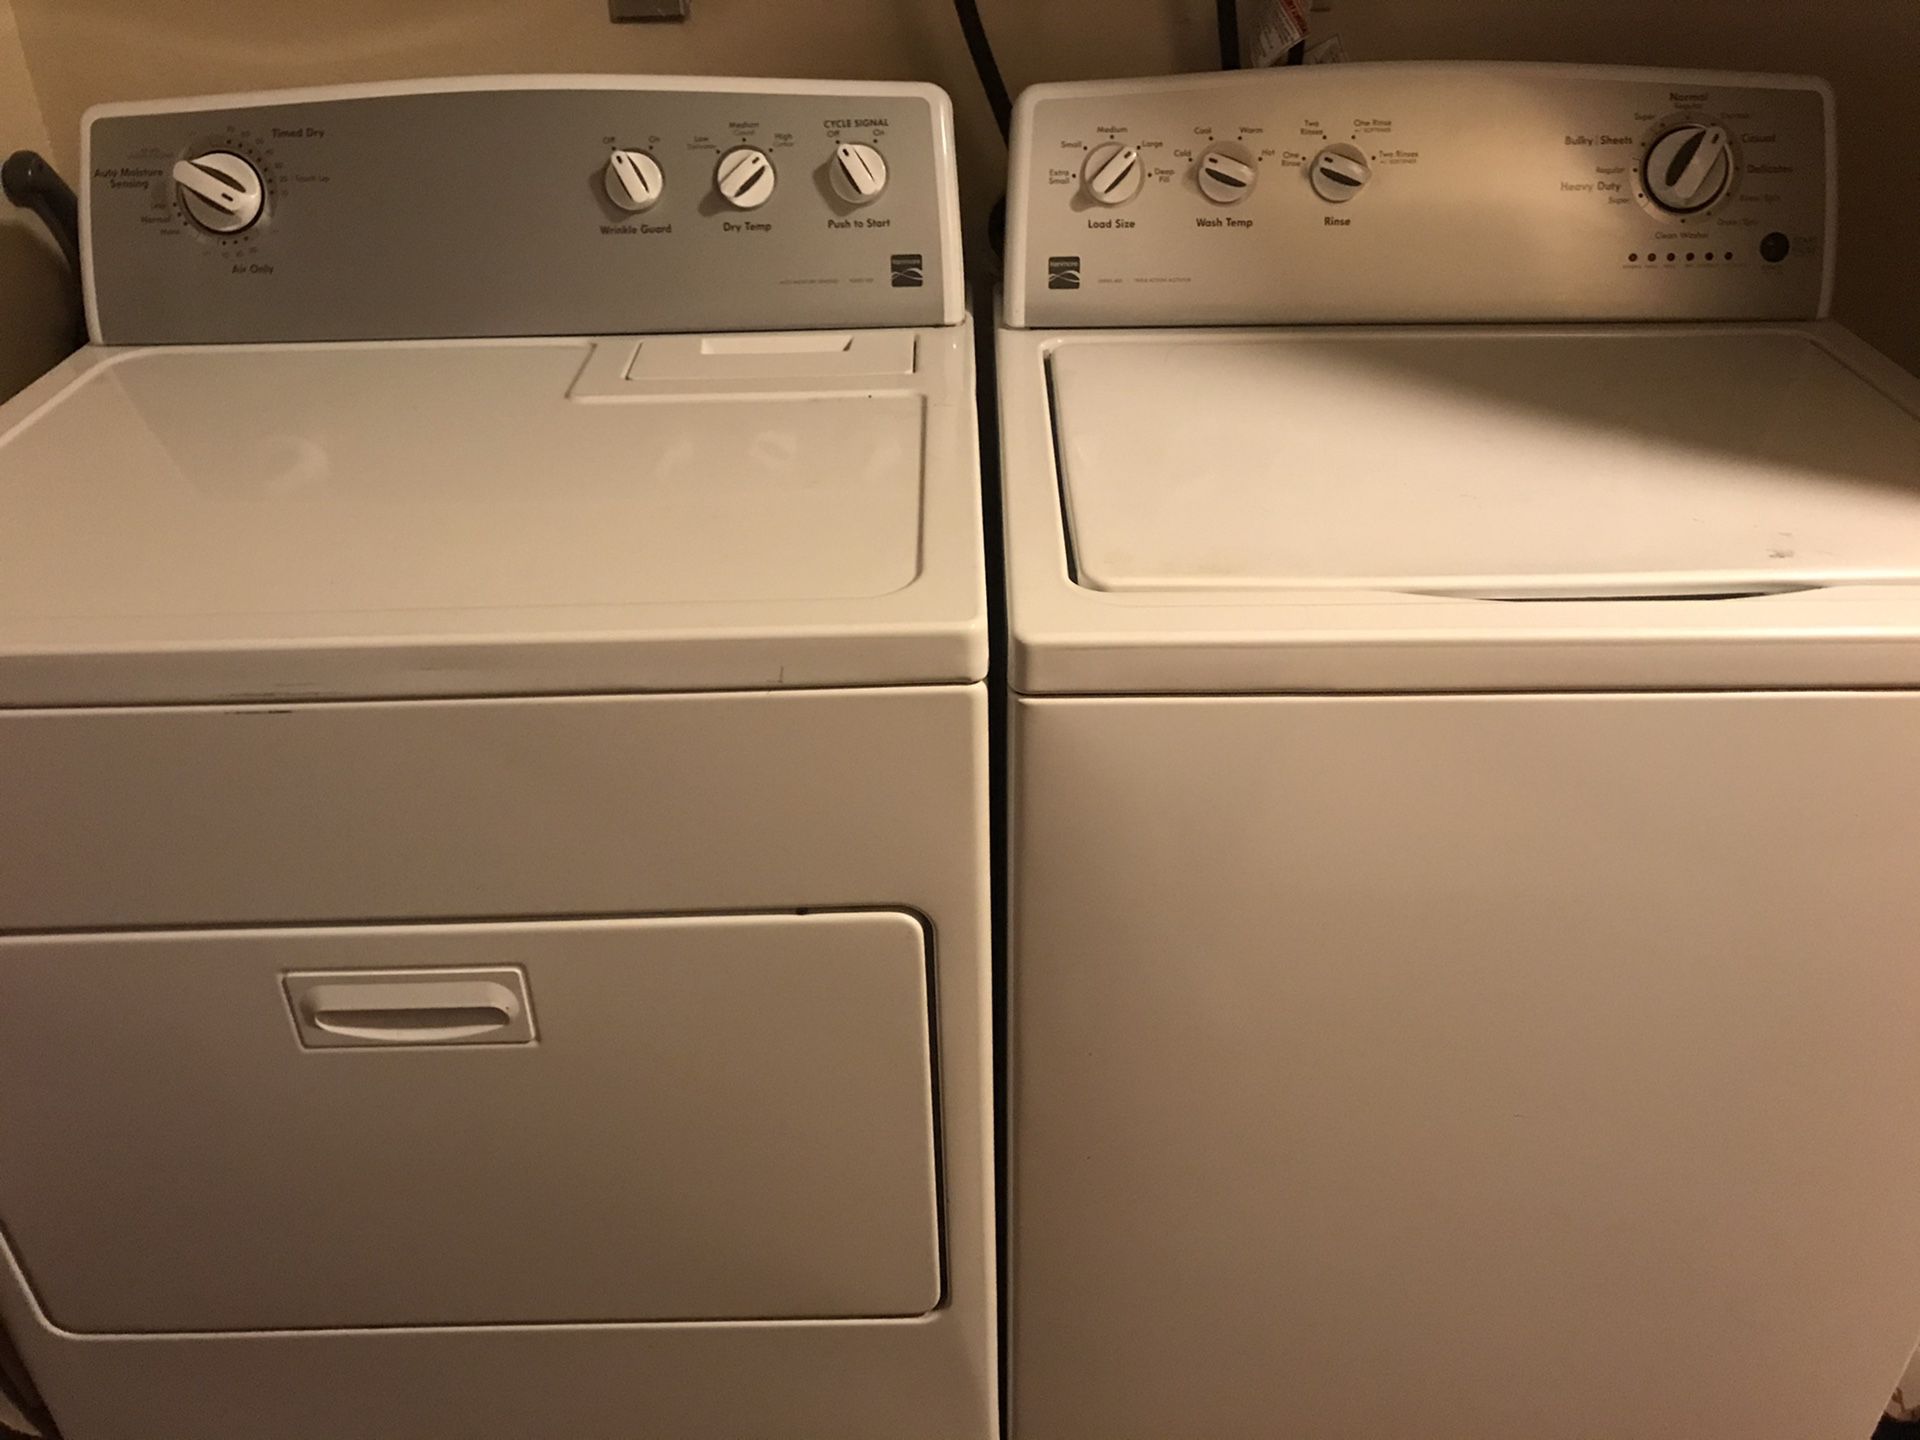 Kenmore washer and drier-great condition just moving